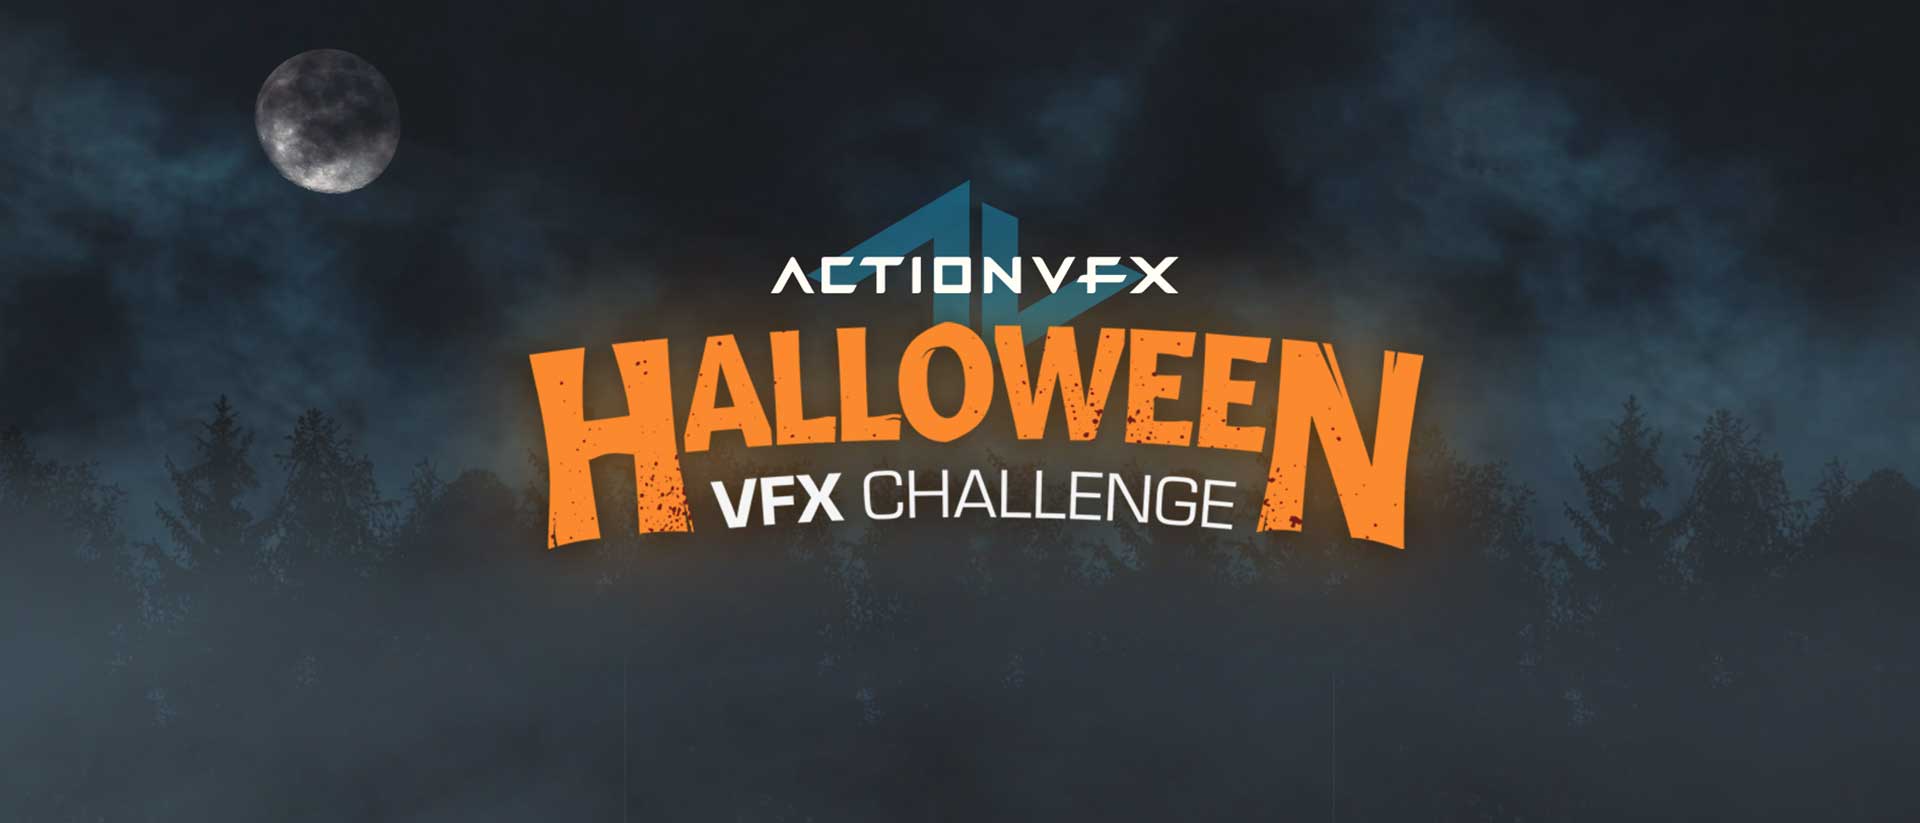 2021 Halloween VFX Challenge | Use The FREE Halloween Pack For A Chance At Four 1-Year Subscription Prizes!